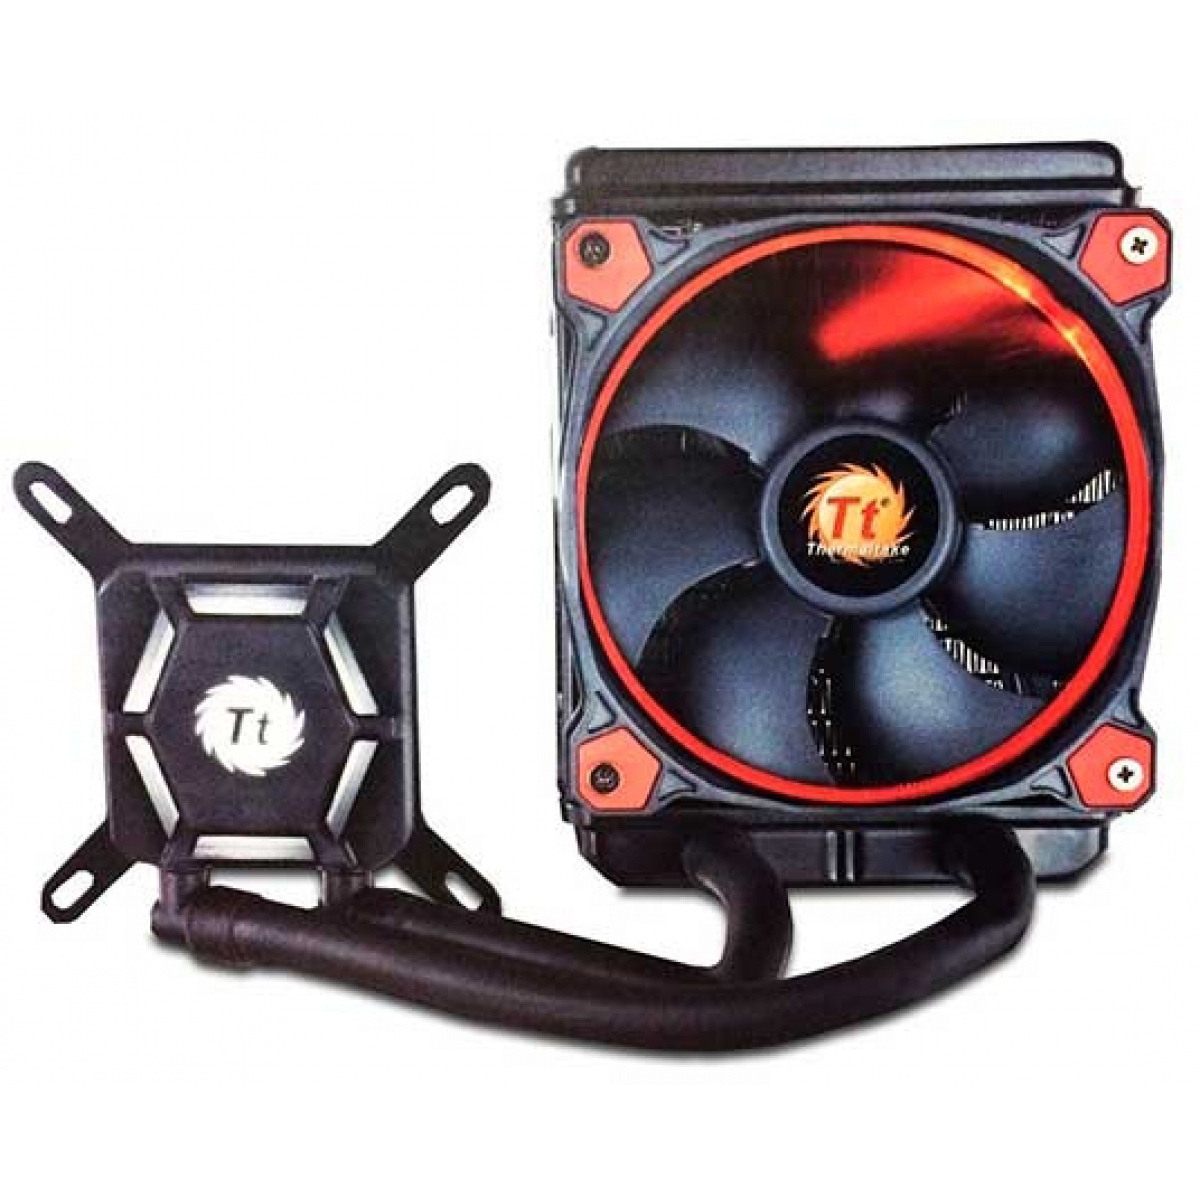 Water Cooler Thermaltake 3.0 X120, Red 120mm, Intel-AMD, CL-W159-PL12RE-B